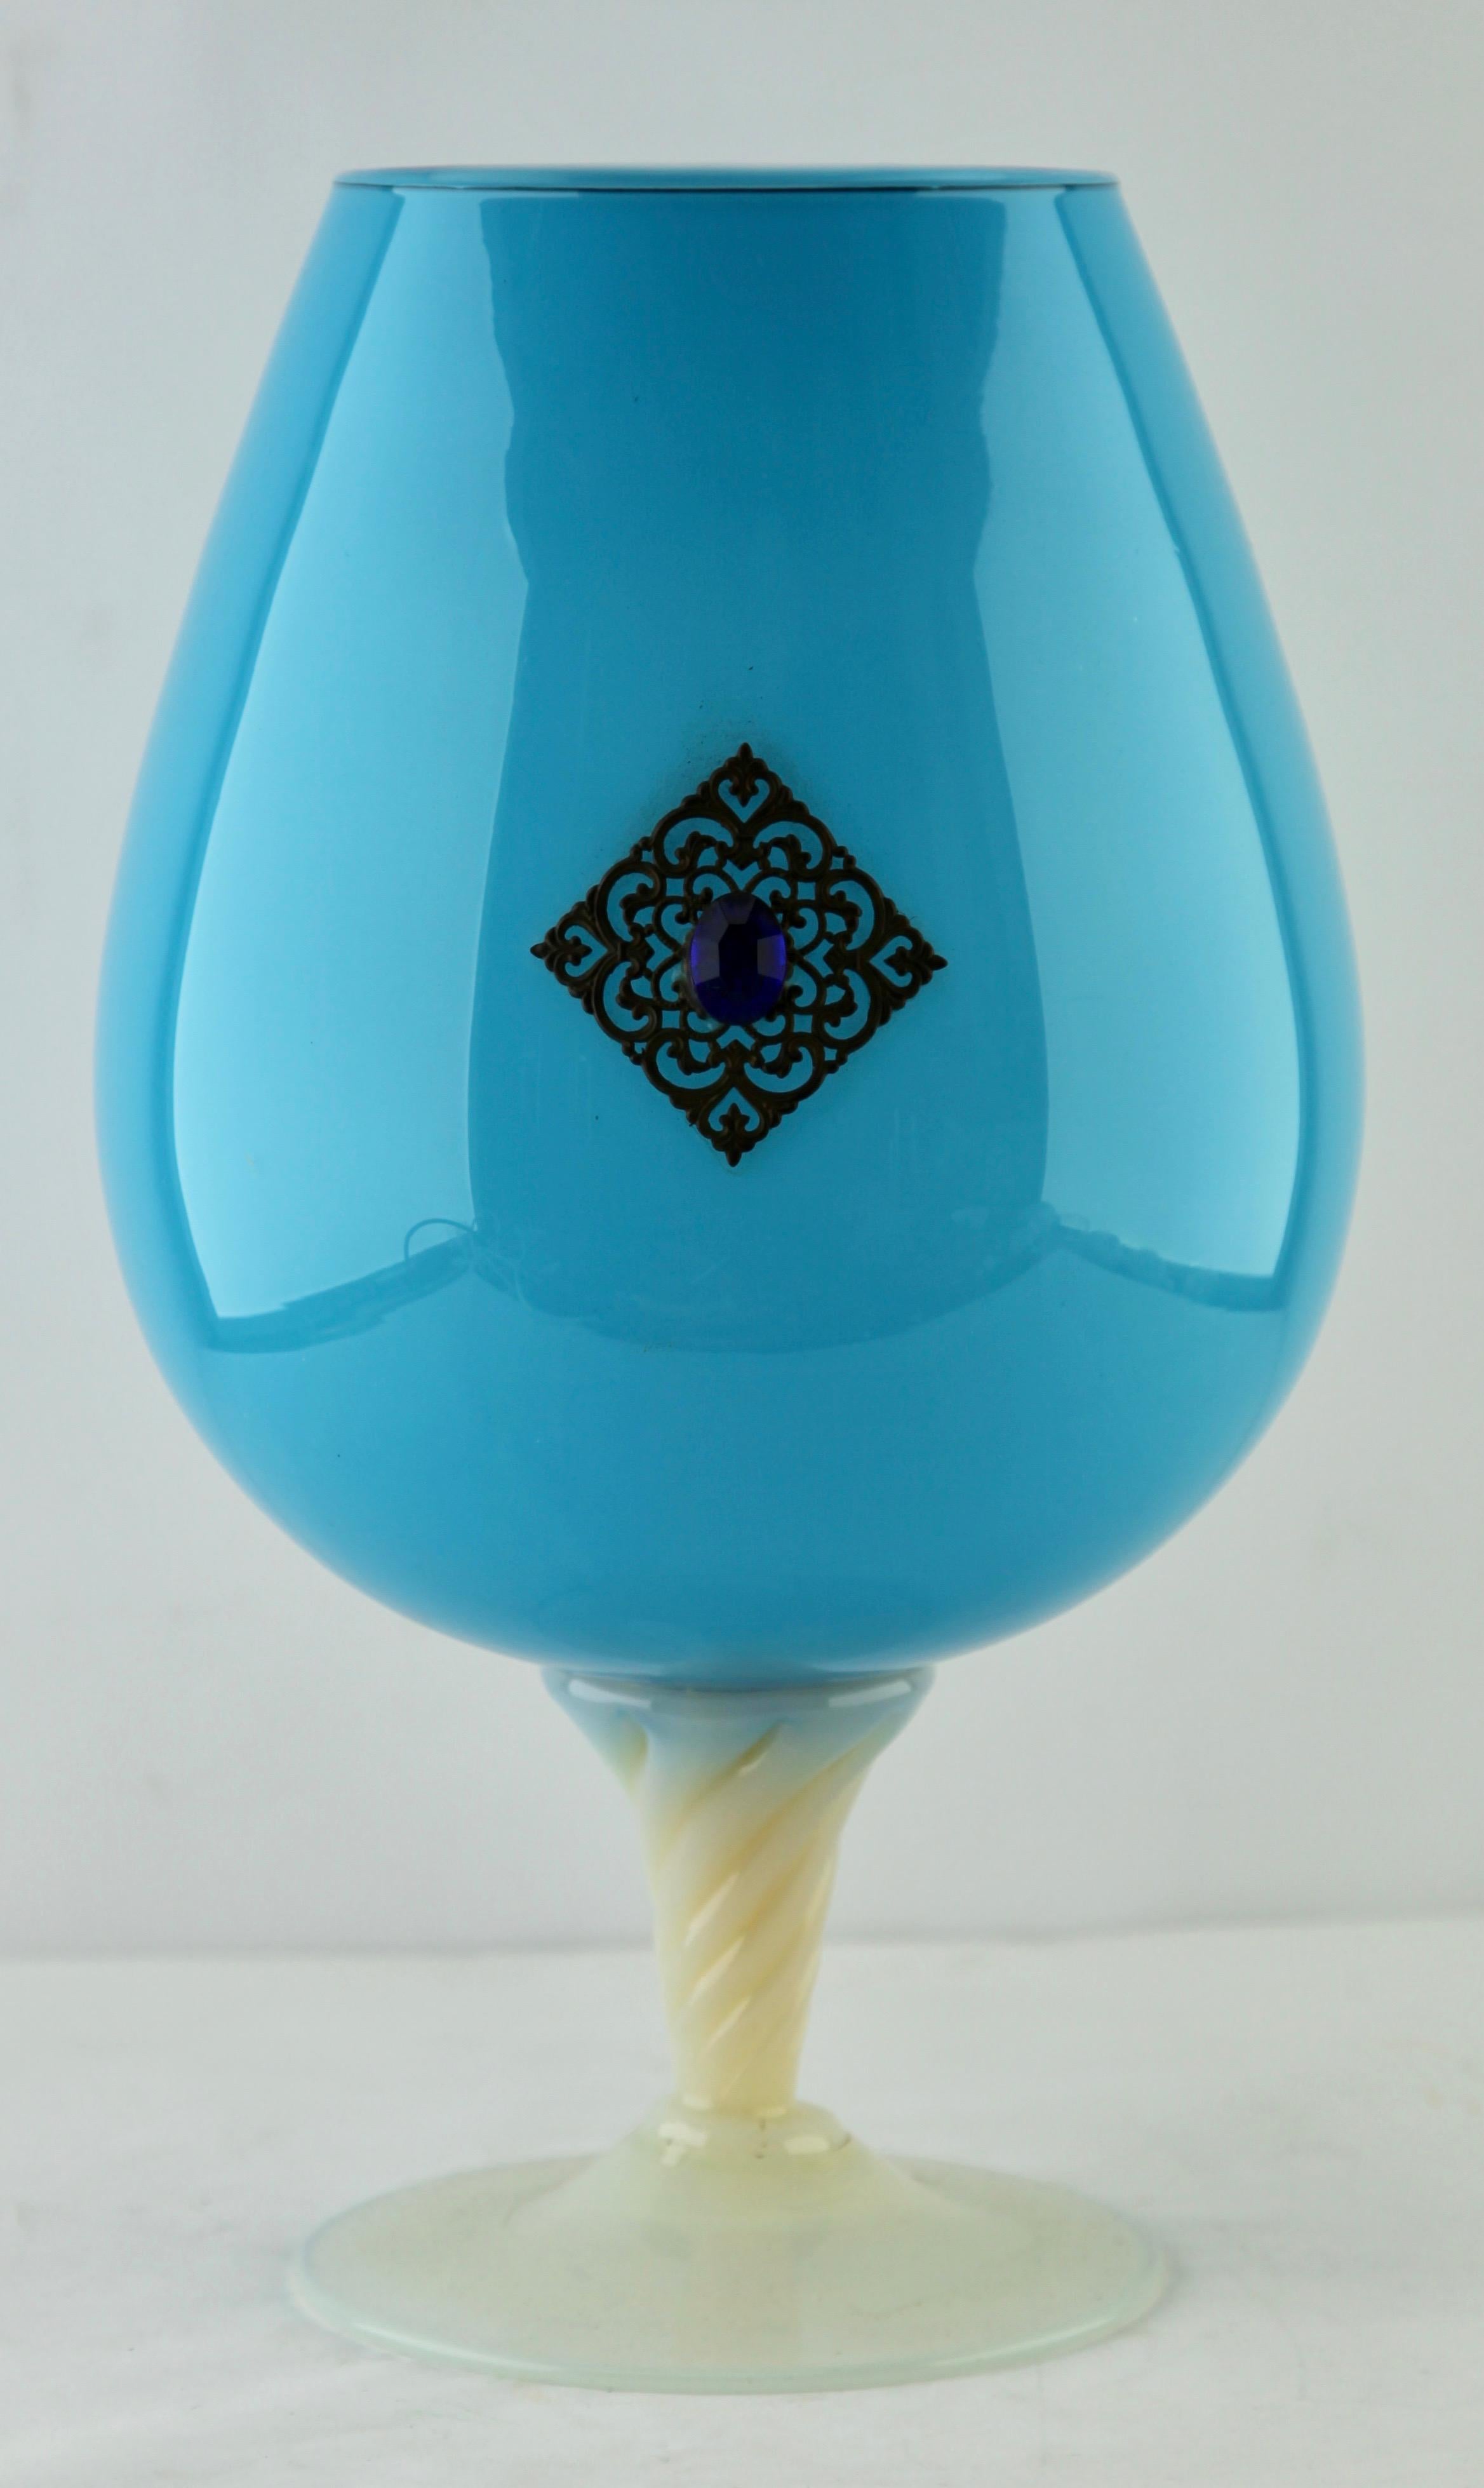 Mid-Century Modern Empoli 'Florence, Italy' Cognac Glass in Turquoise in Opaline, 1970s